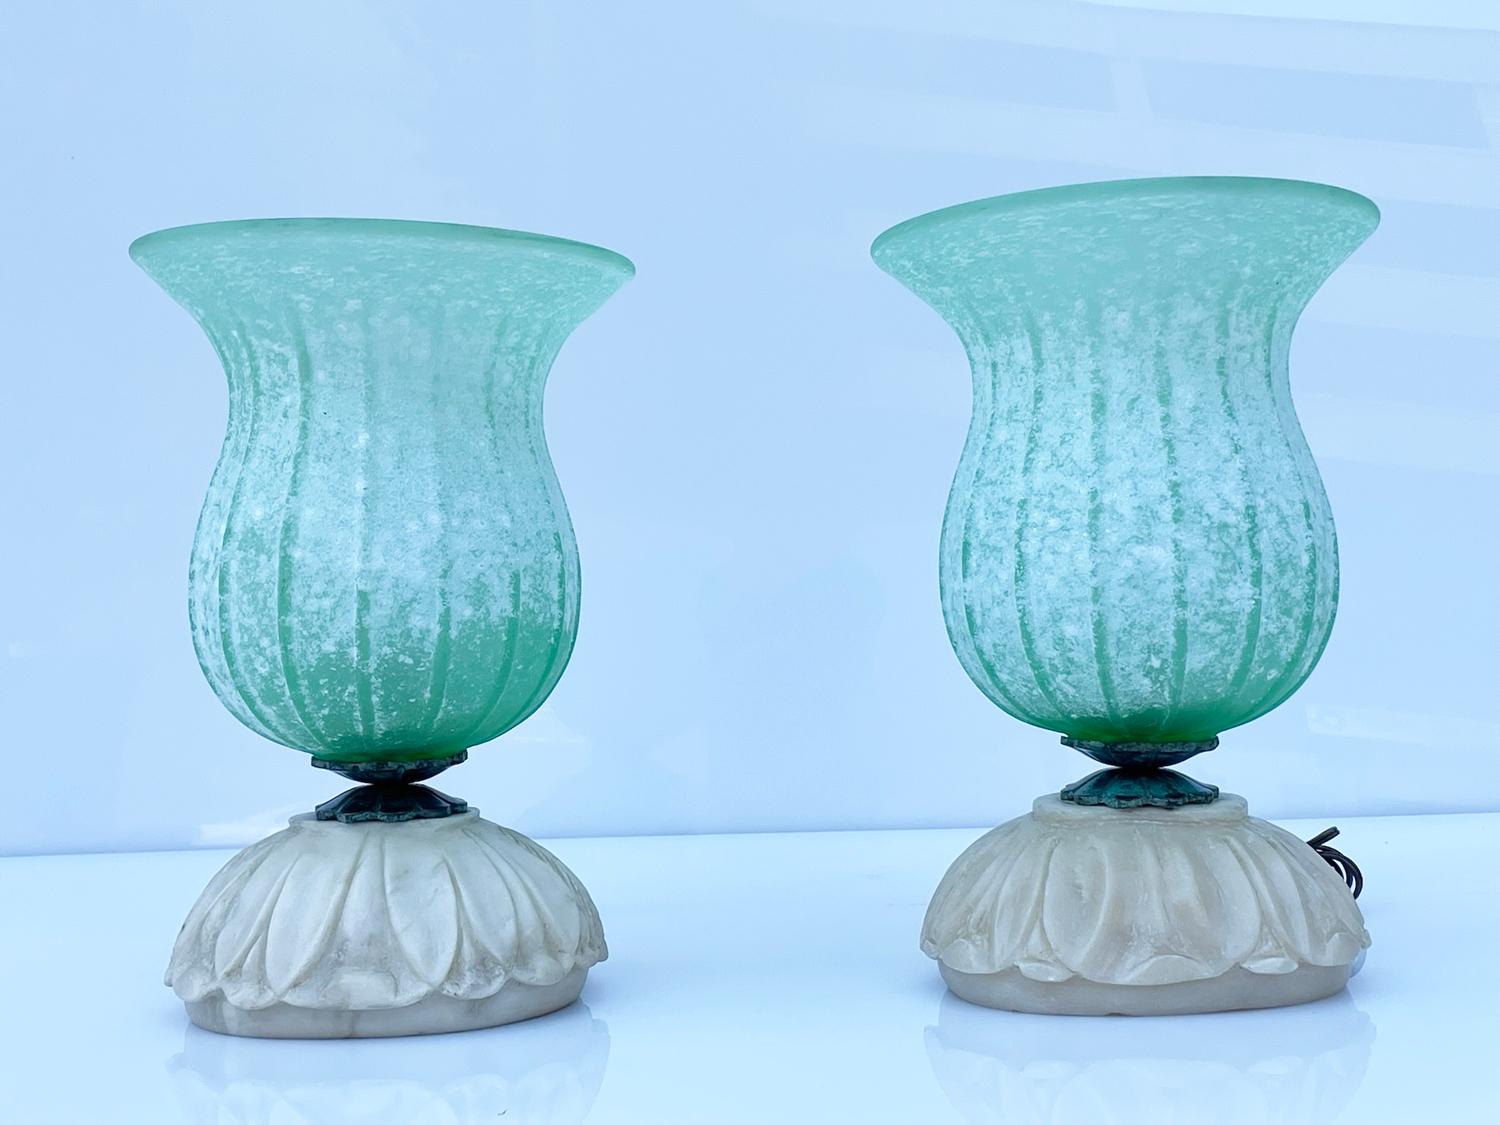 Introducing our exquisite Murano Glass Table Lamps with Hand Carved Alabaster Base, straight from Italy and dating back to the 1950s. These timeless pieces are a true testament to the craftsmanship and elegance of the era.

Each lamp features an